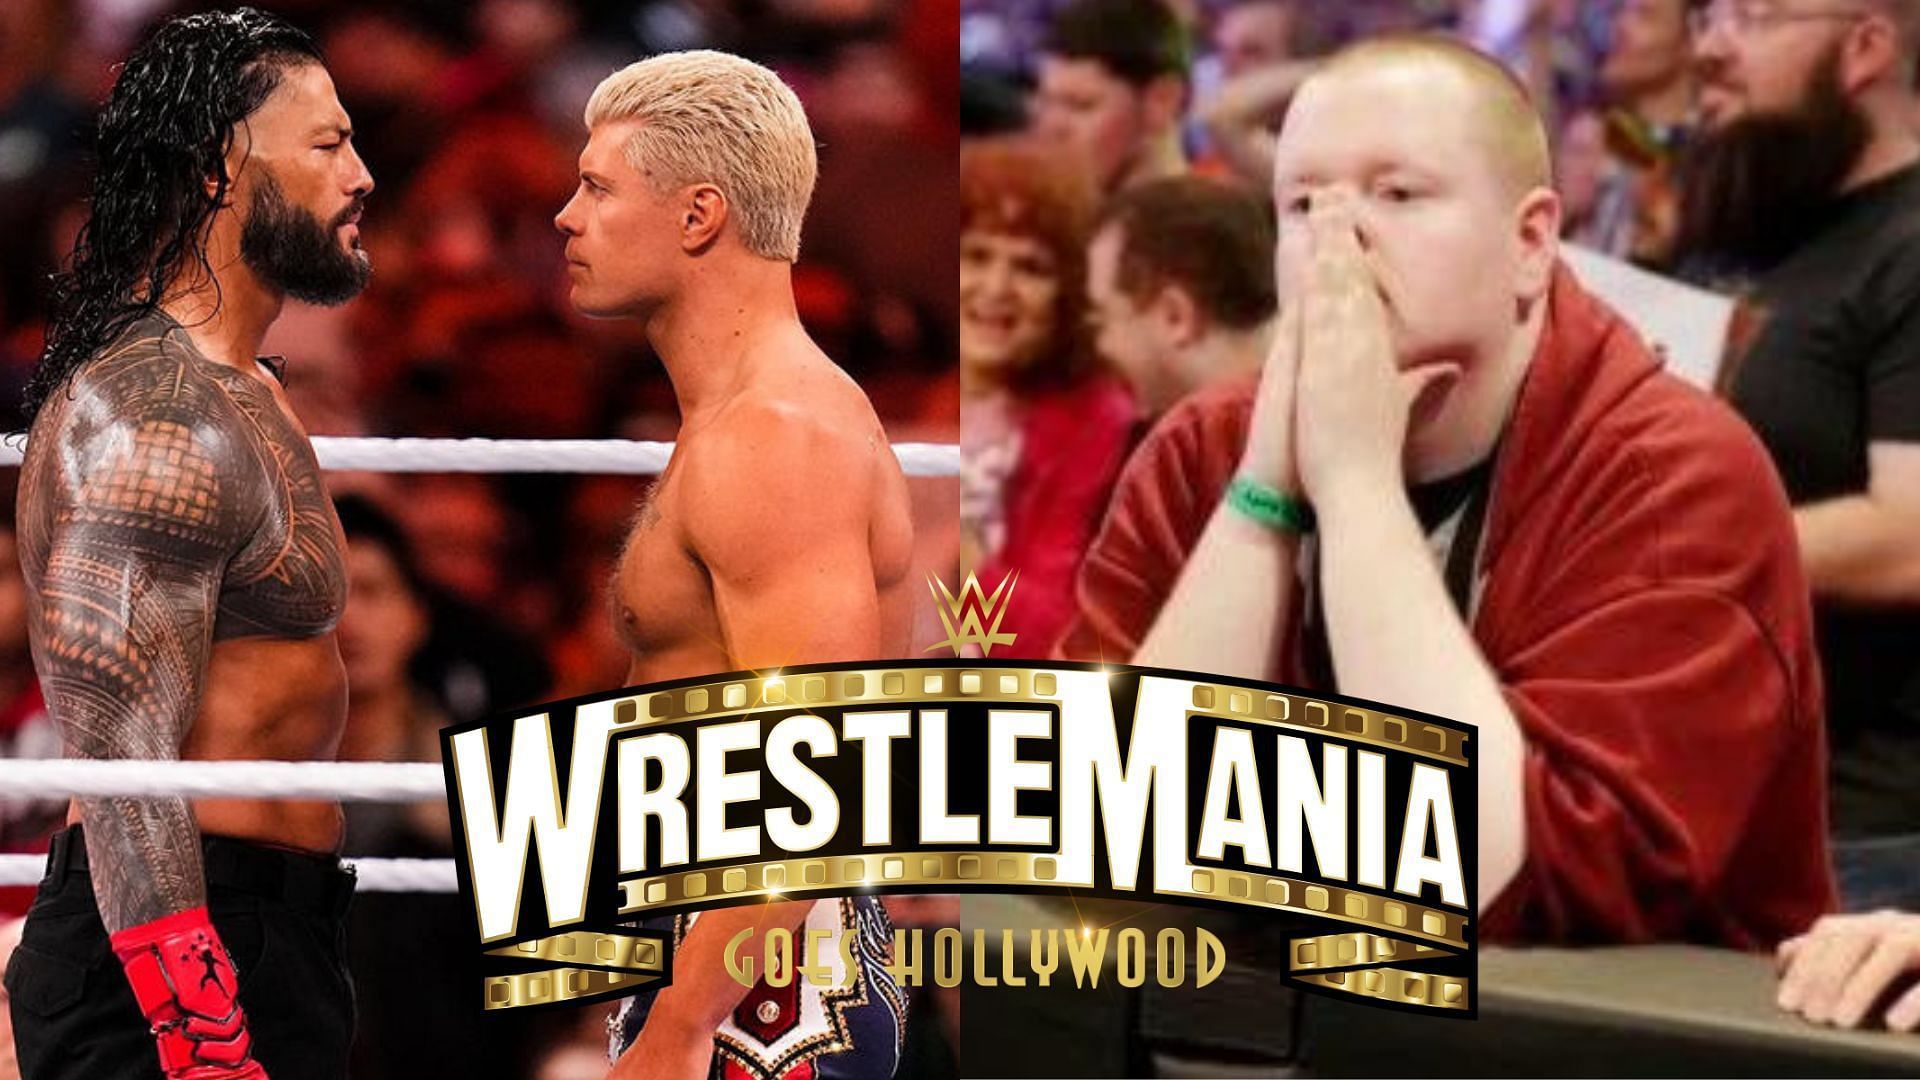 WWE WrestleMania 39 aired this past weekend in Los Angeles.